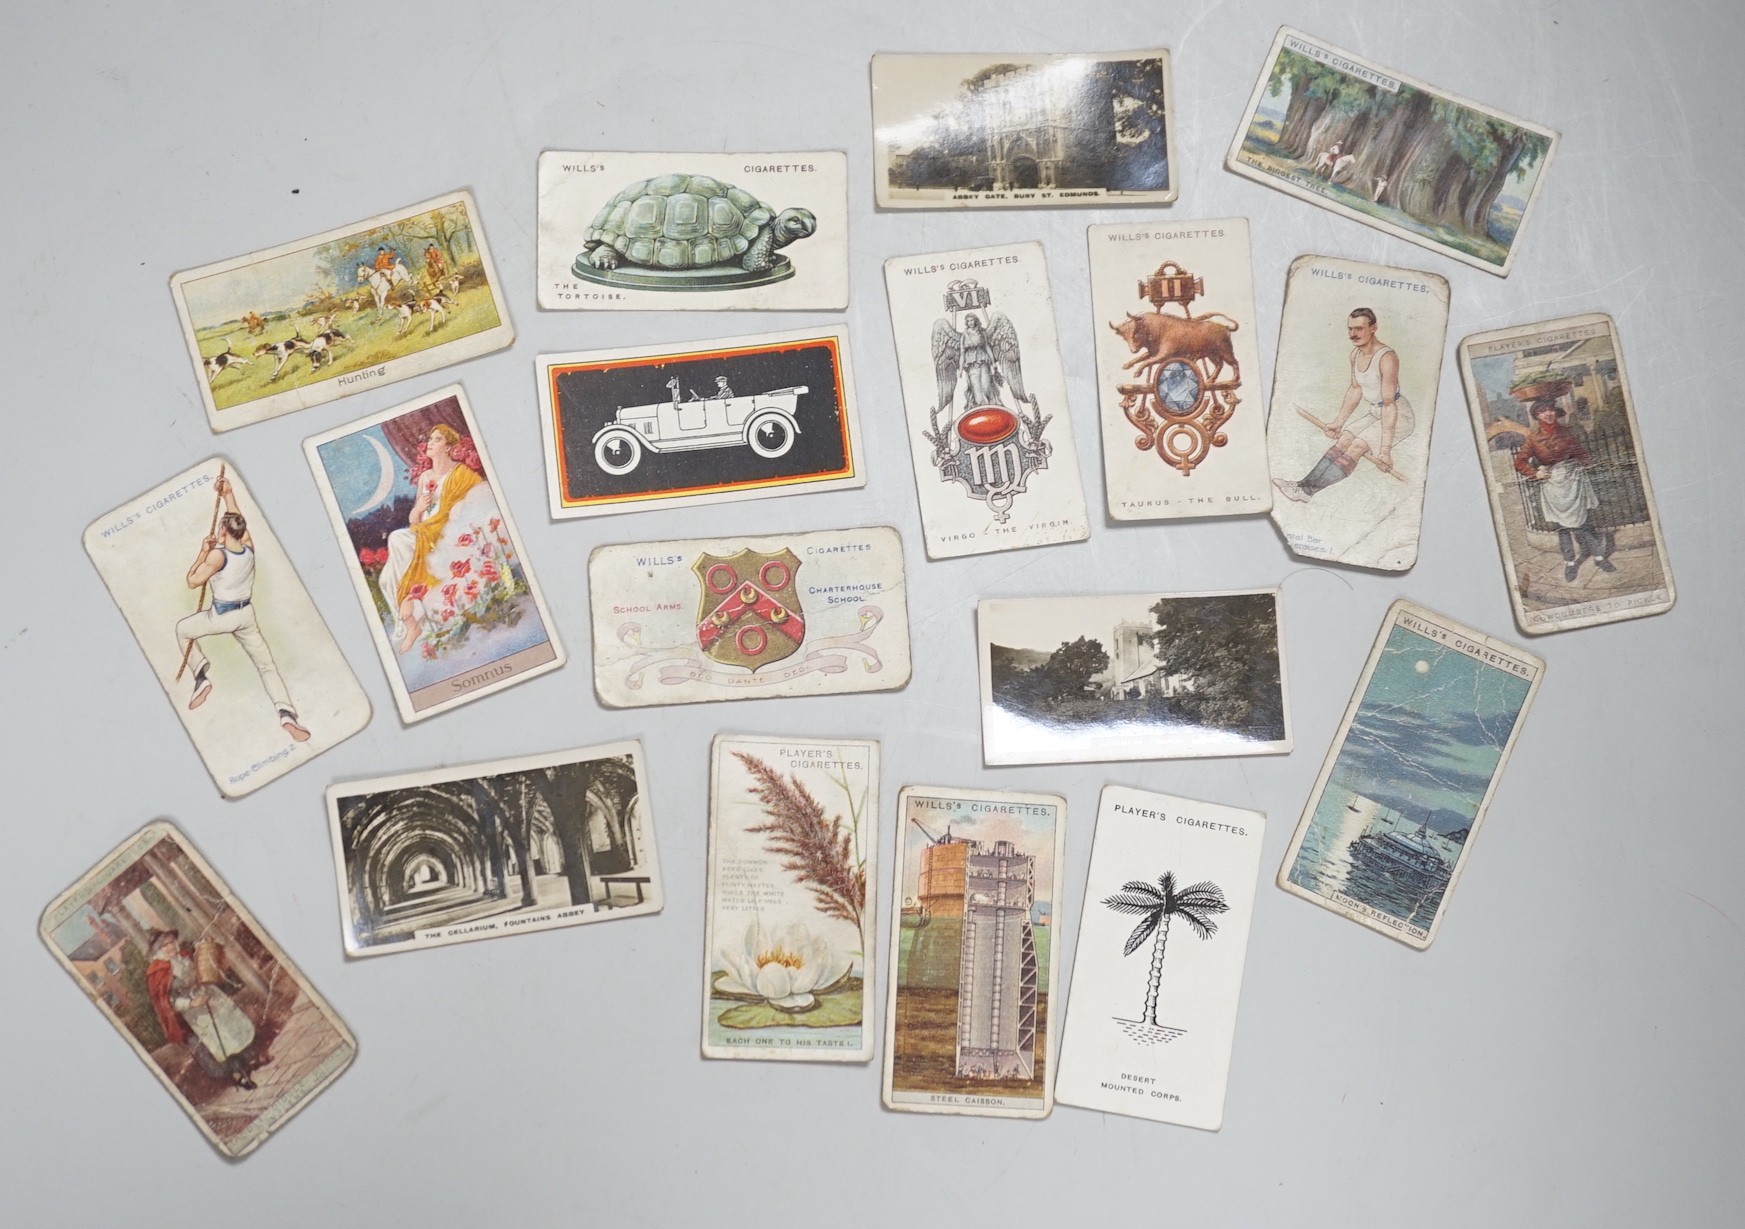 A large collection of mounted and loose cigarette cards